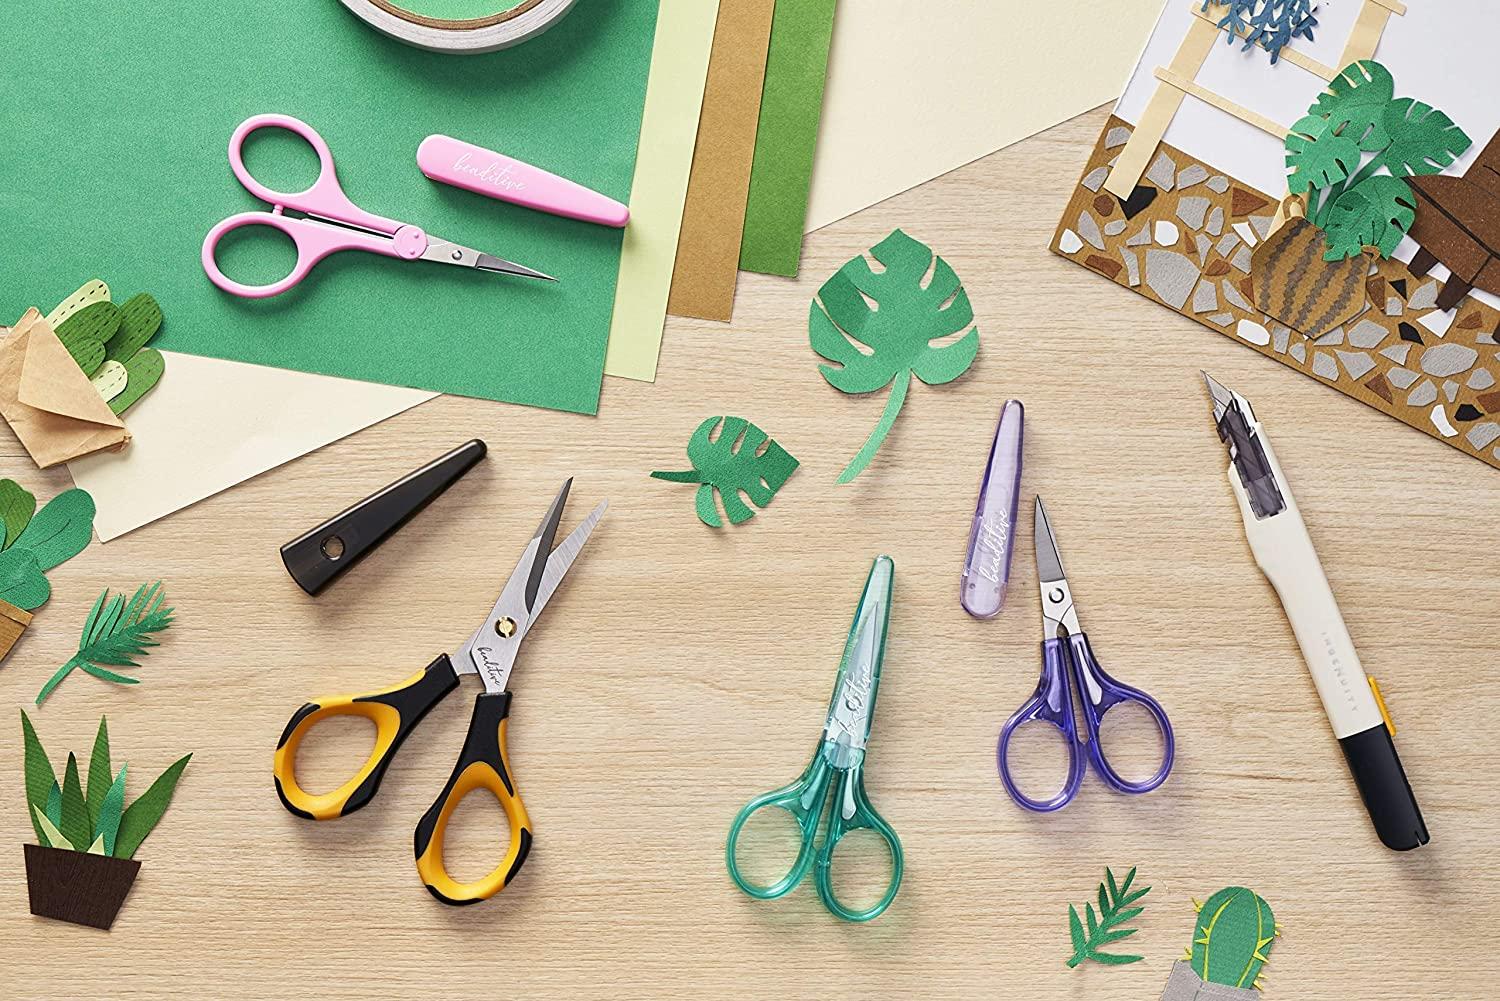  Beaditive High Precision Detail Scissors Set (2-Pc) Sharp,  Fine Tips, Paper Cutting, Scrapbooking, Sewing, Crafting, Stainless Steel